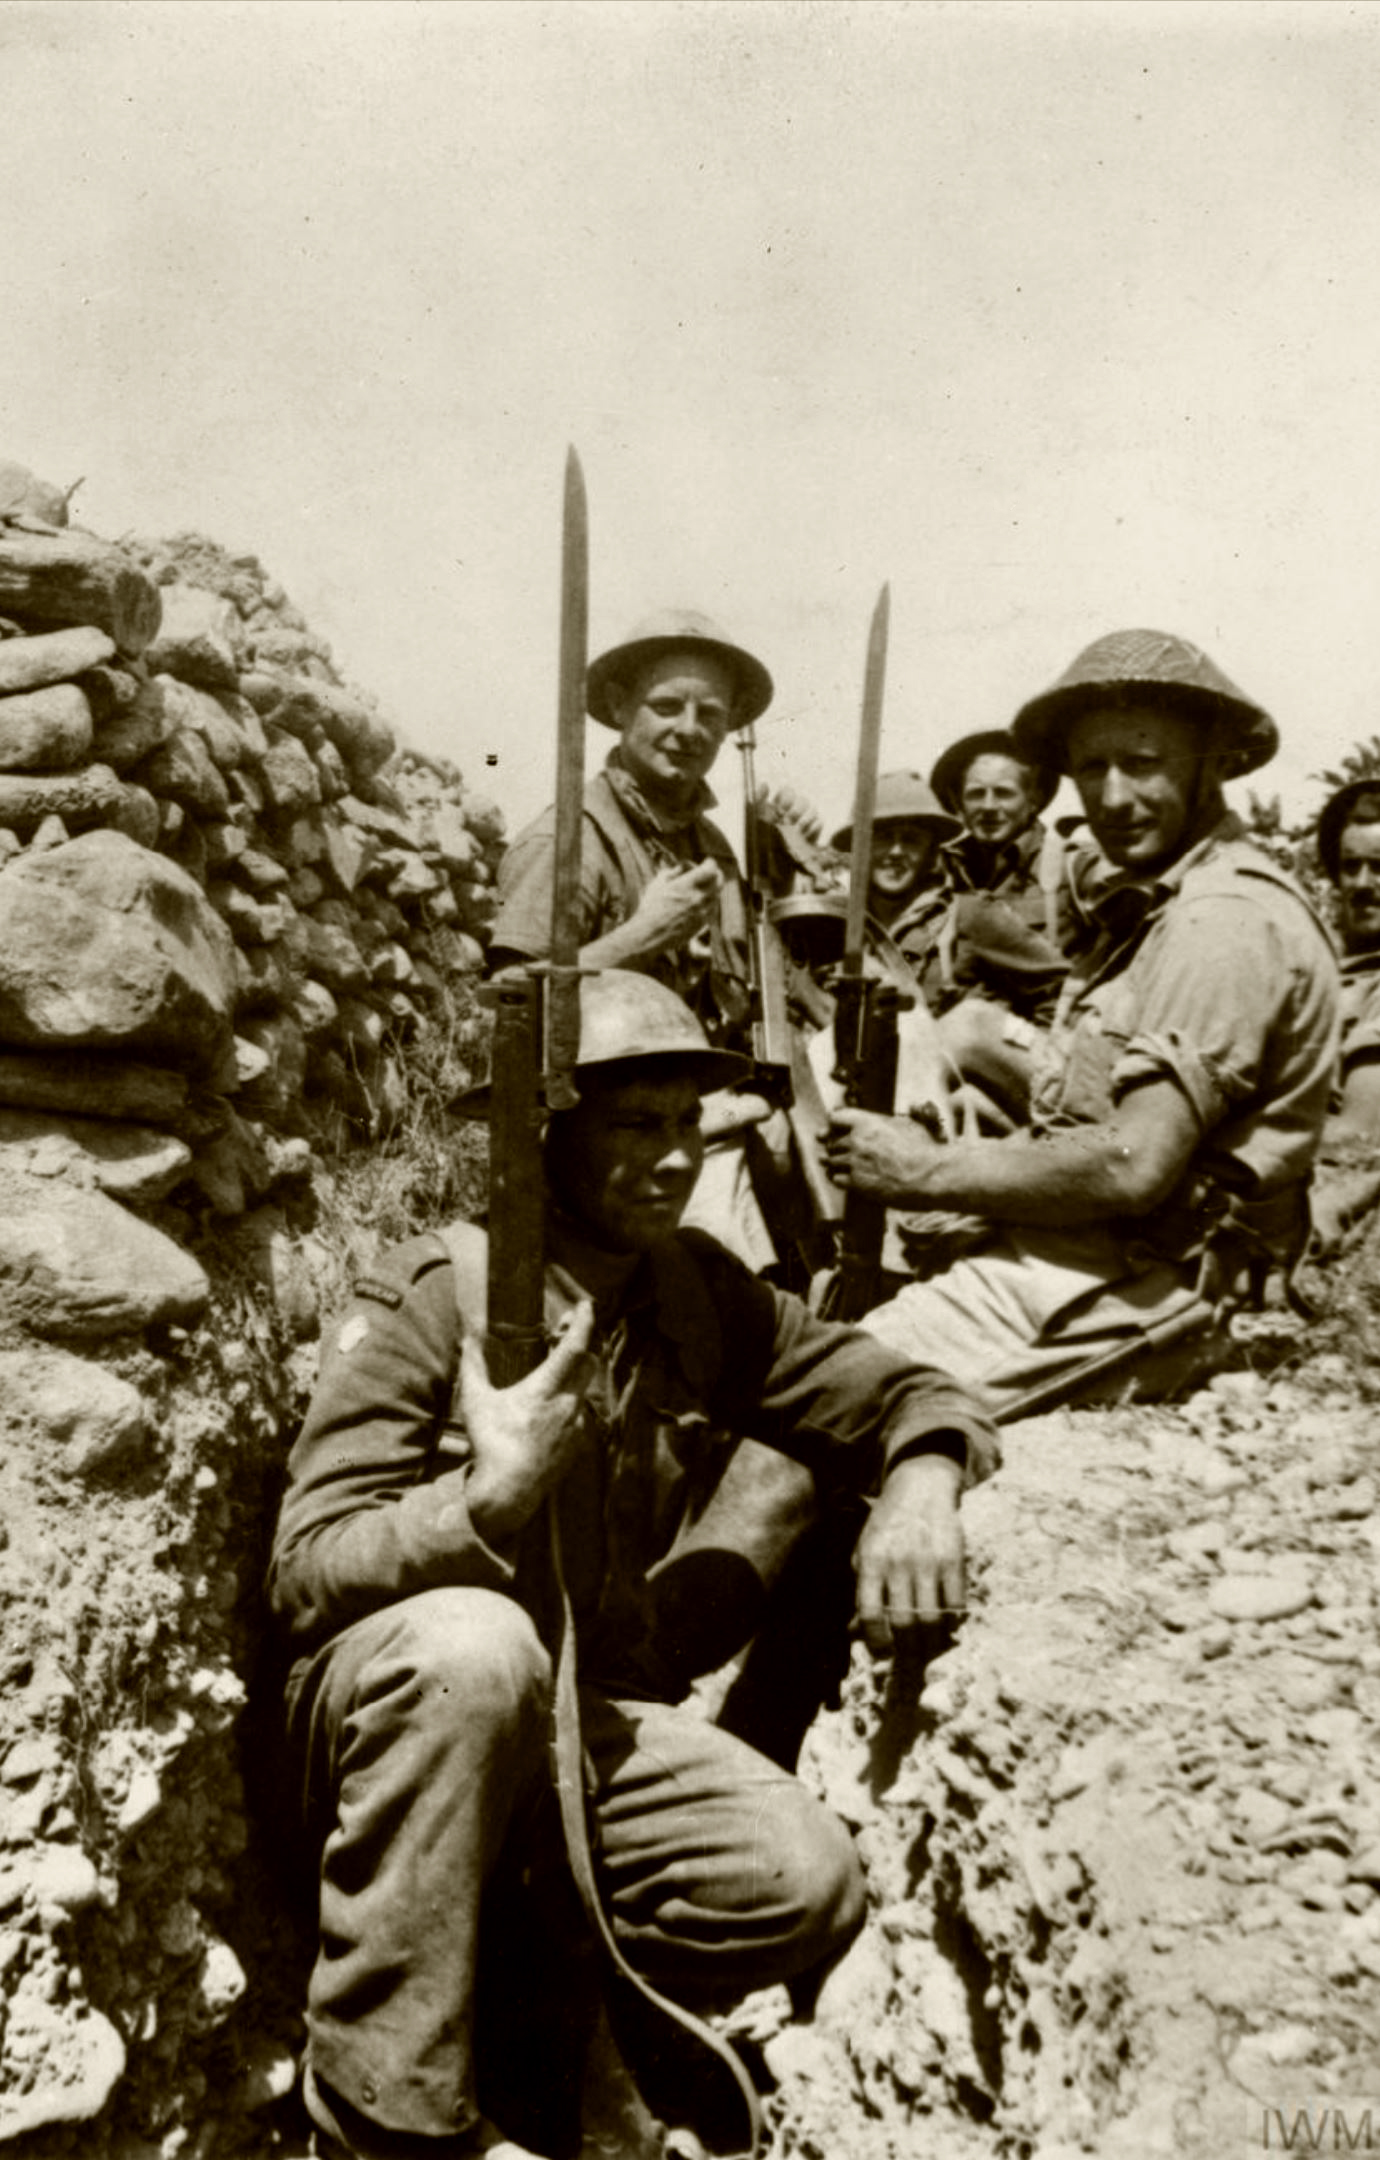 A group of British soldiers in a trench with fixed bayonets IWM E3025E